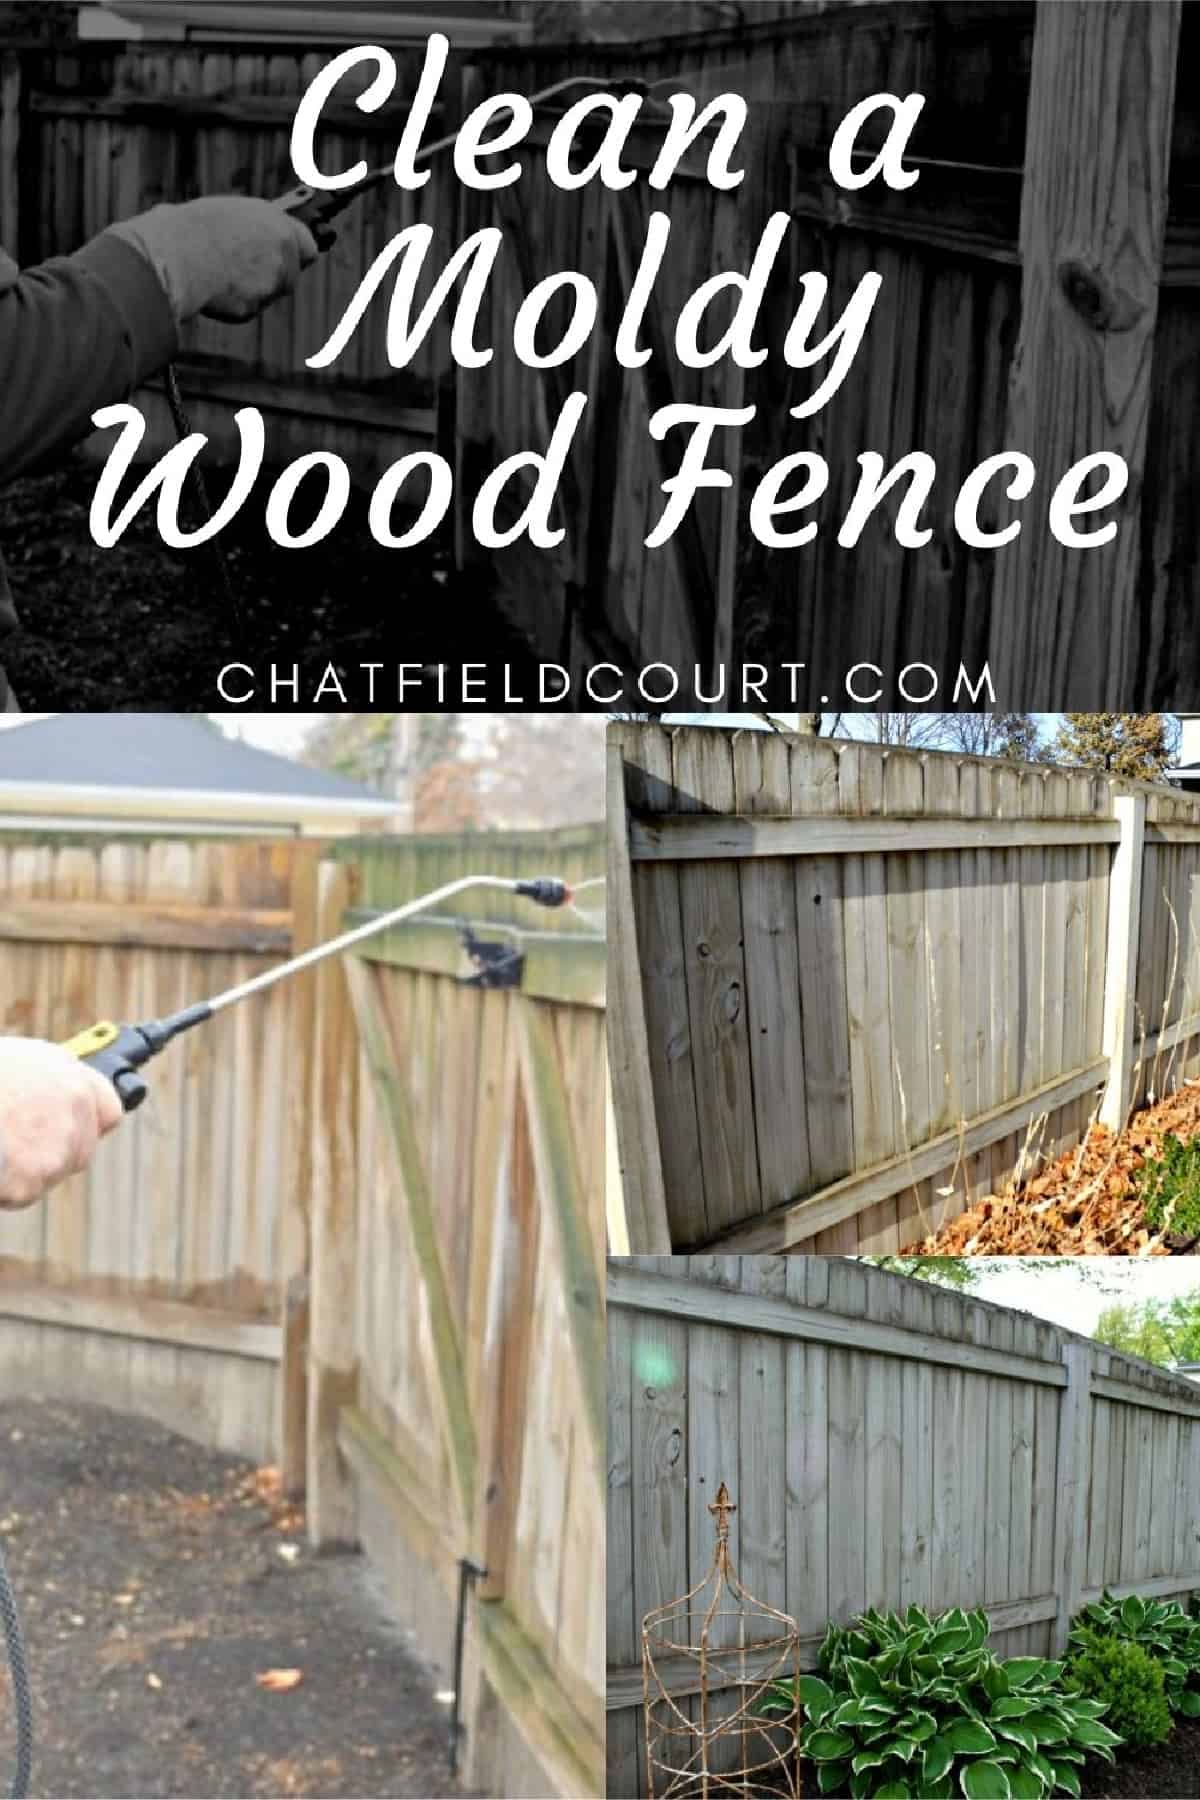 collage of moldy wood fence and cleaning fence, plus a large graphic